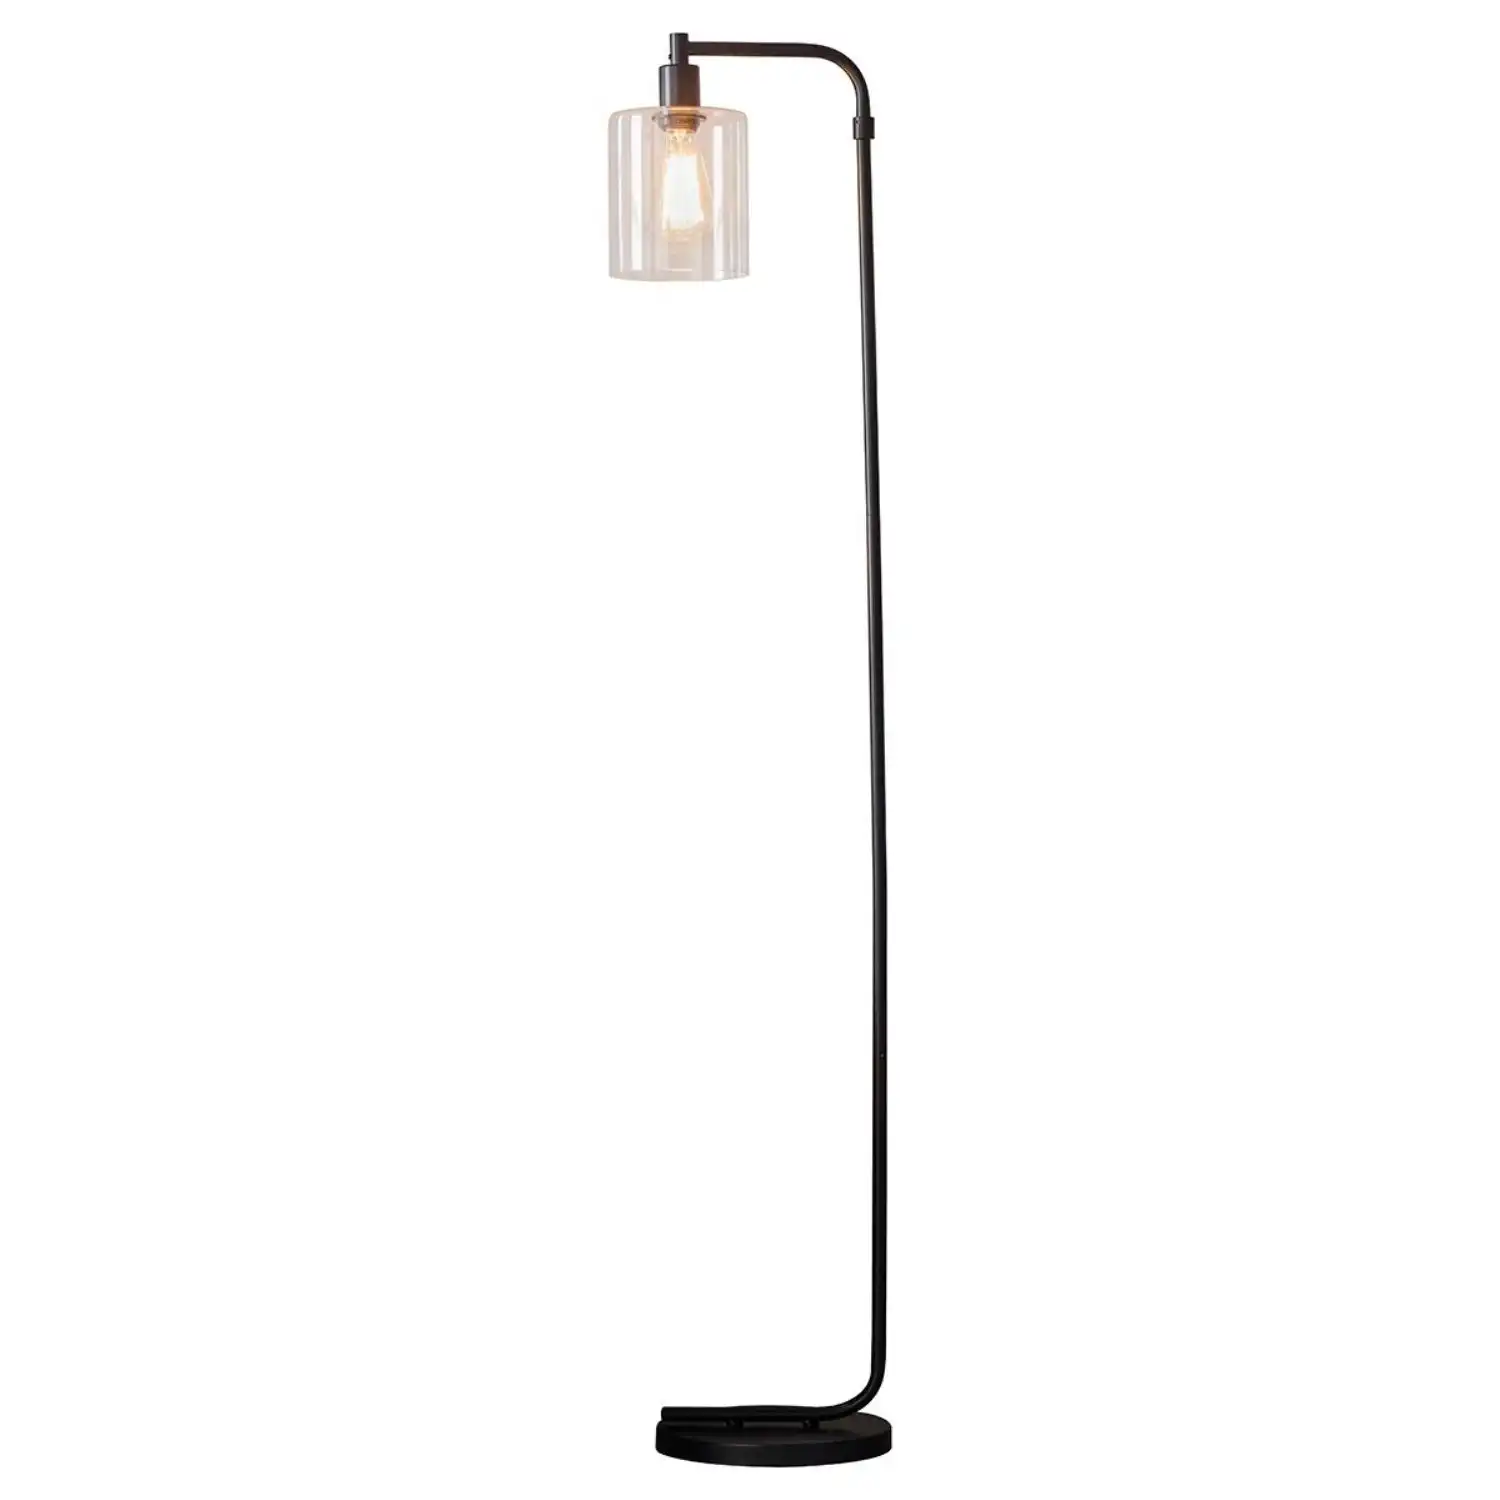 Tall Steel Floor Lamp with Glass Shade